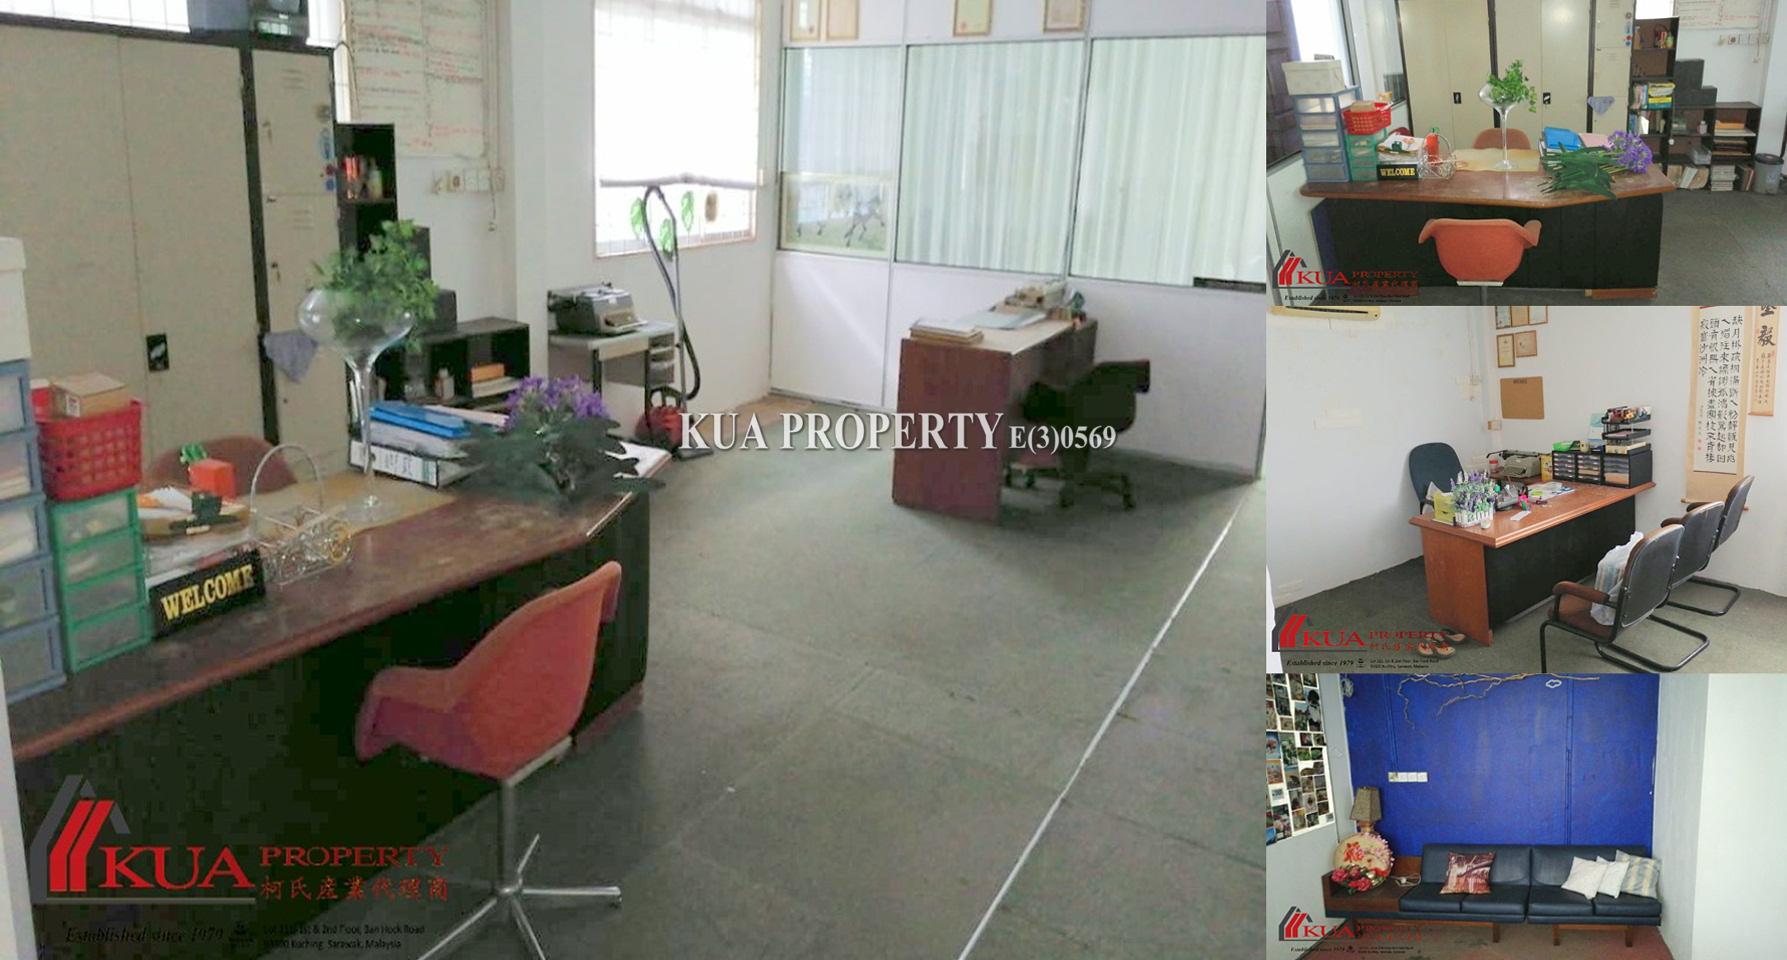 First Floor Shoplot/Office For Rent! at Ang Cheng Ho, Kuching